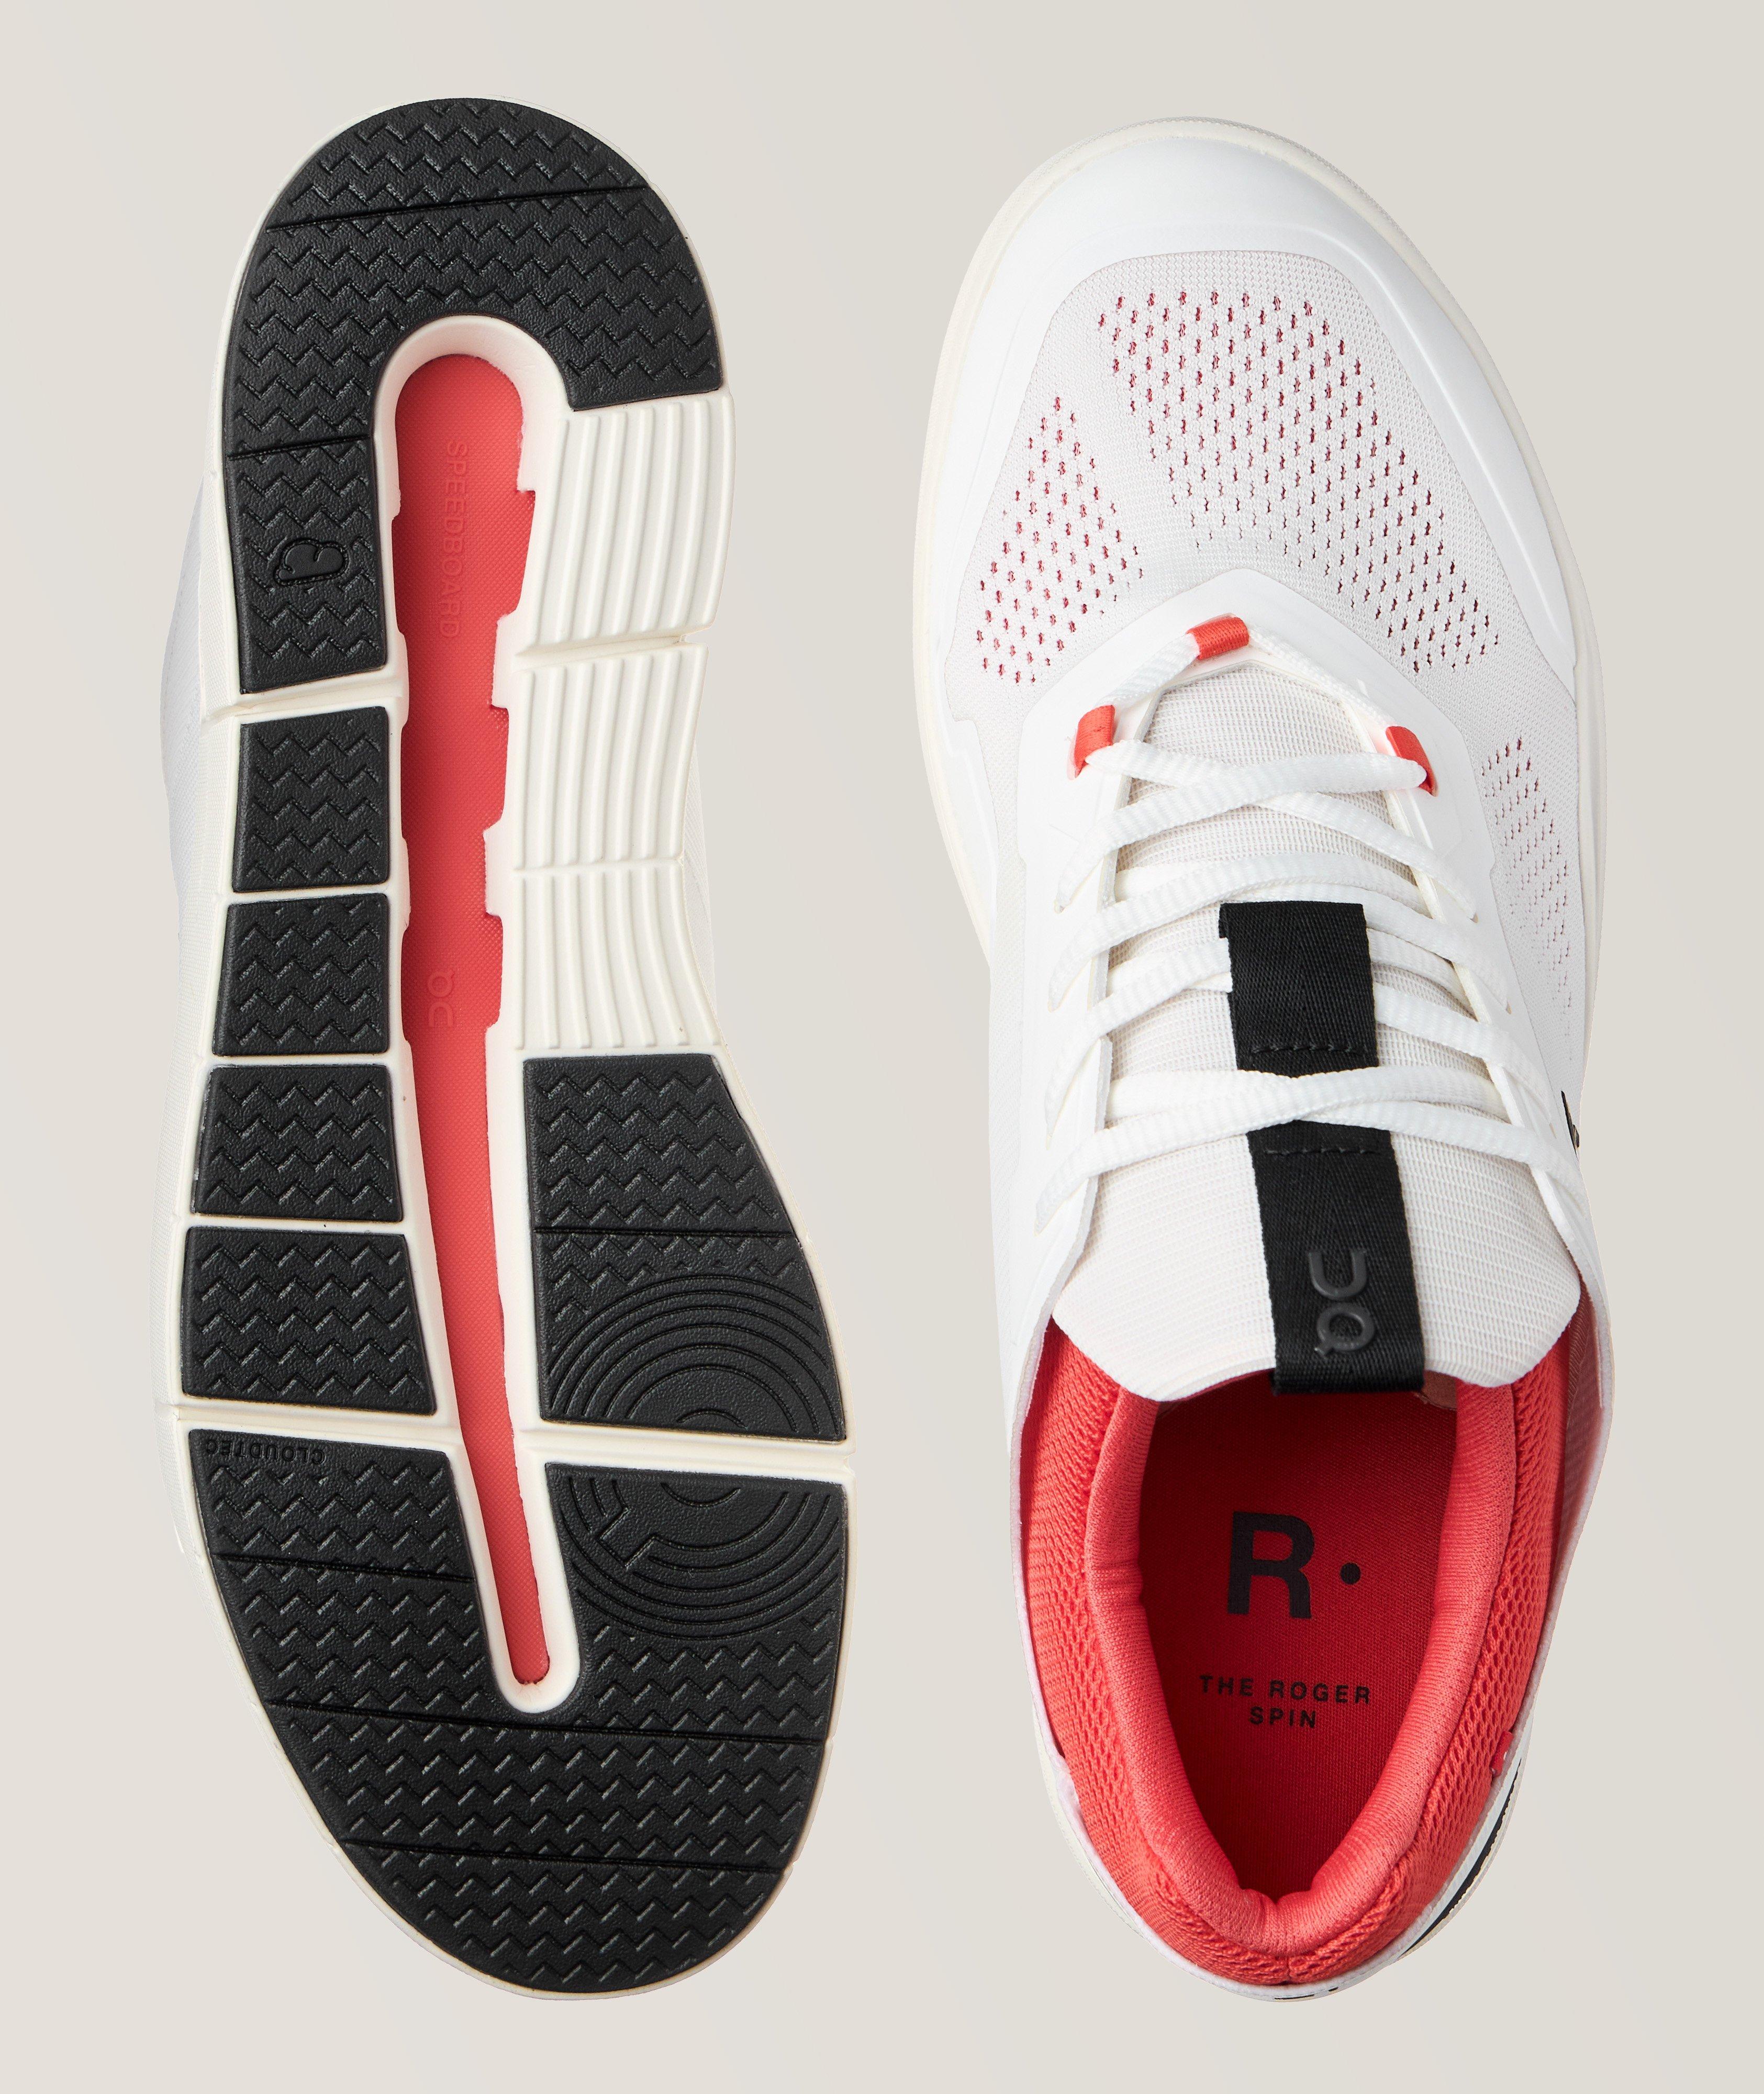 Chaussure sport The Roger Spin en tricot image 2